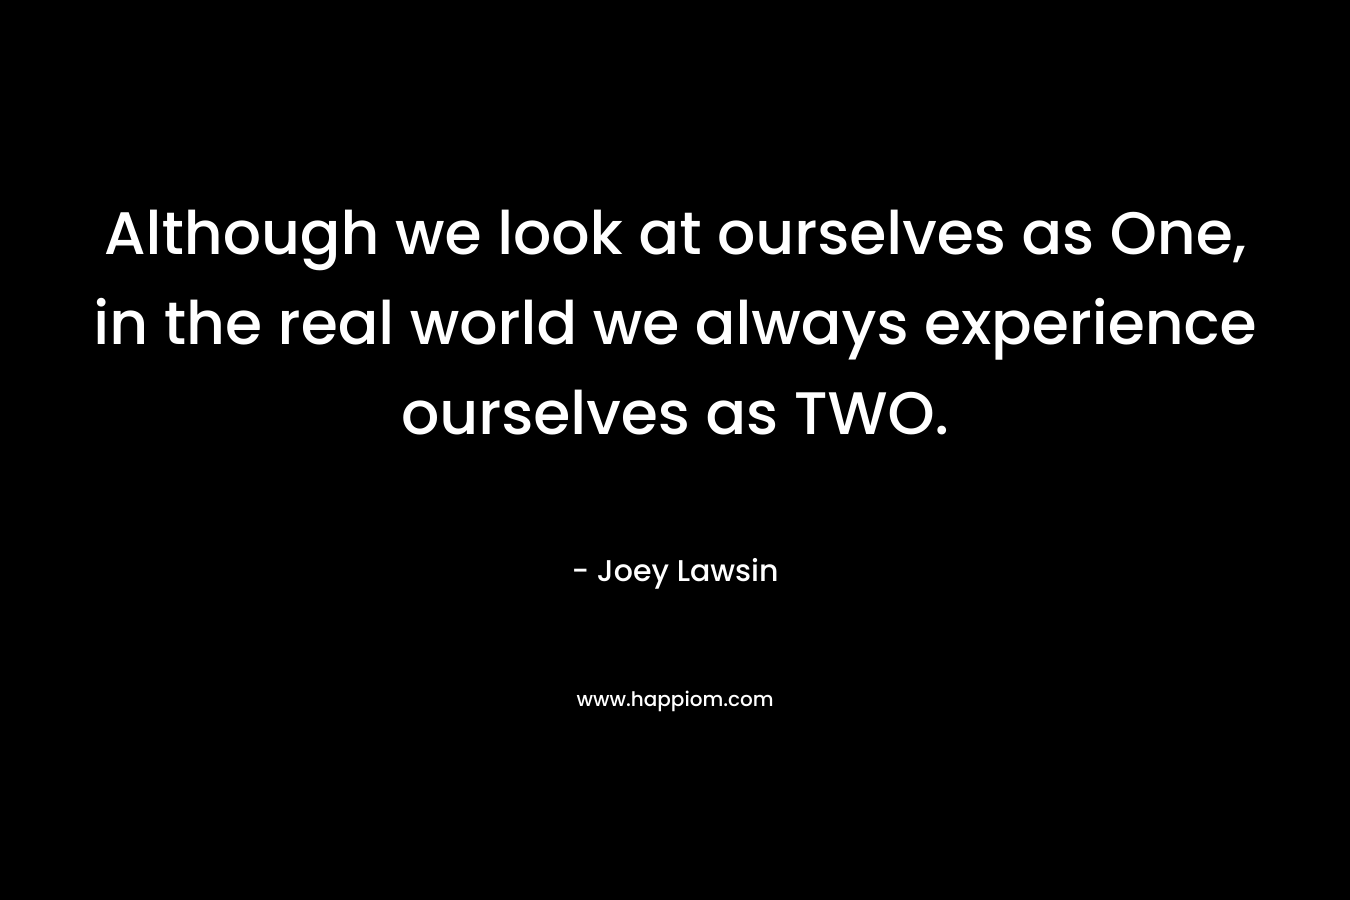 Although we look at ourselves as One, in the real world we always experience ourselves as TWO. – Joey Lawsin